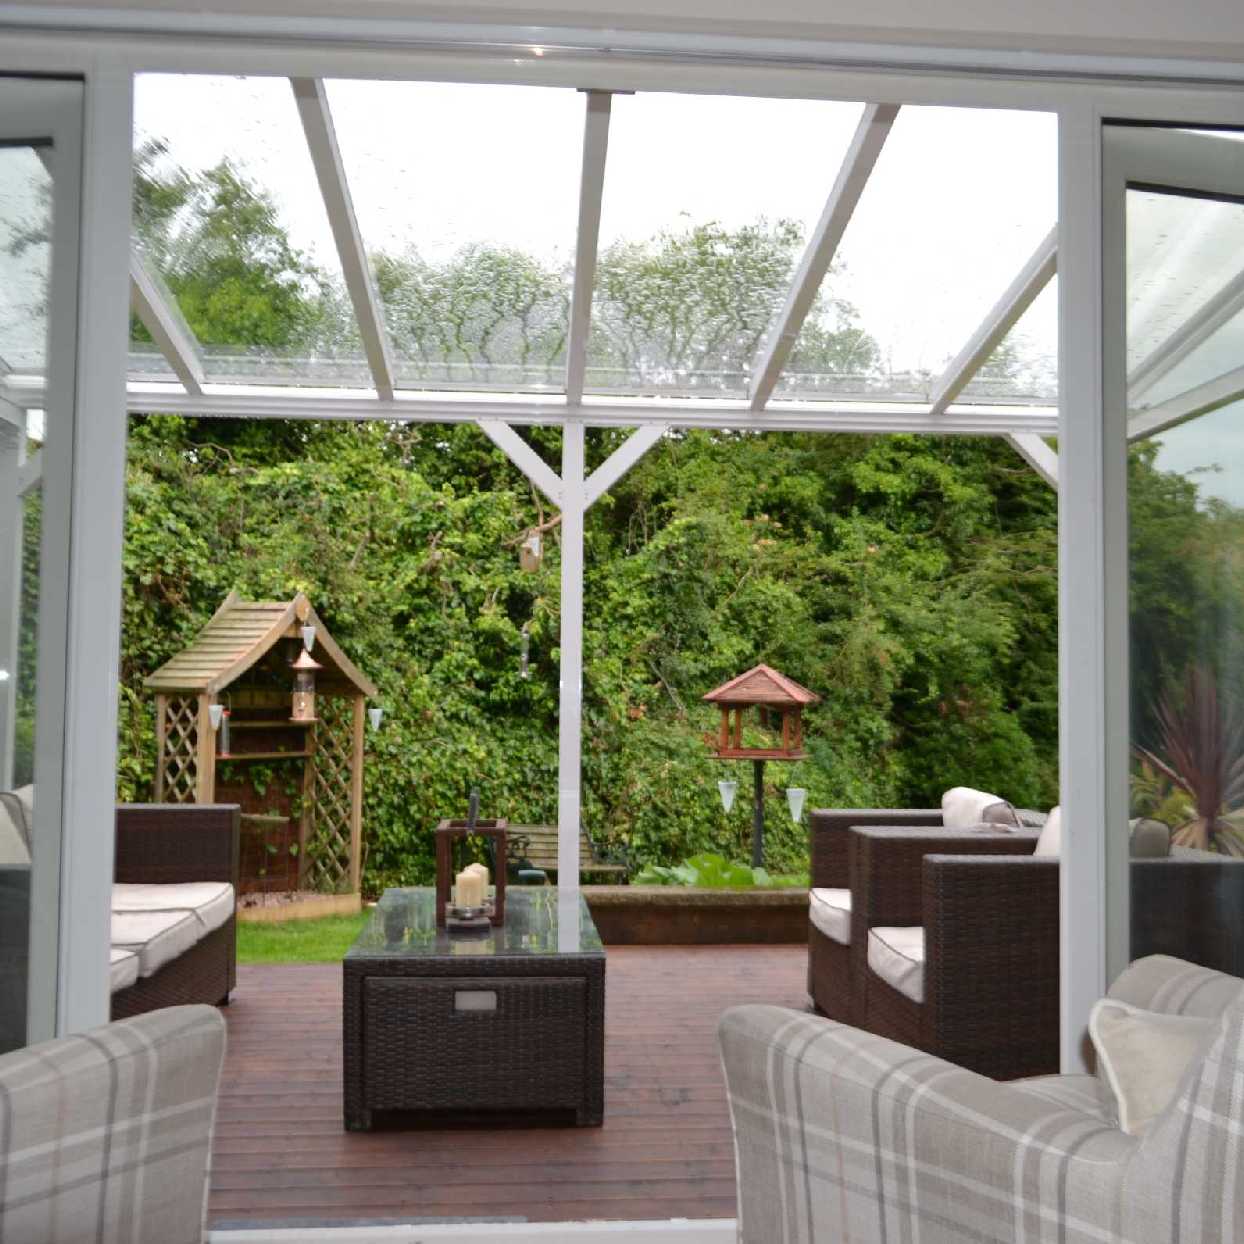 Great selection of Omega Smart Lean-To Canopy, White UNGLAZED for 6mm Glazing - 6.3m (W) x 1.5m (P), (4) Supporting Posts